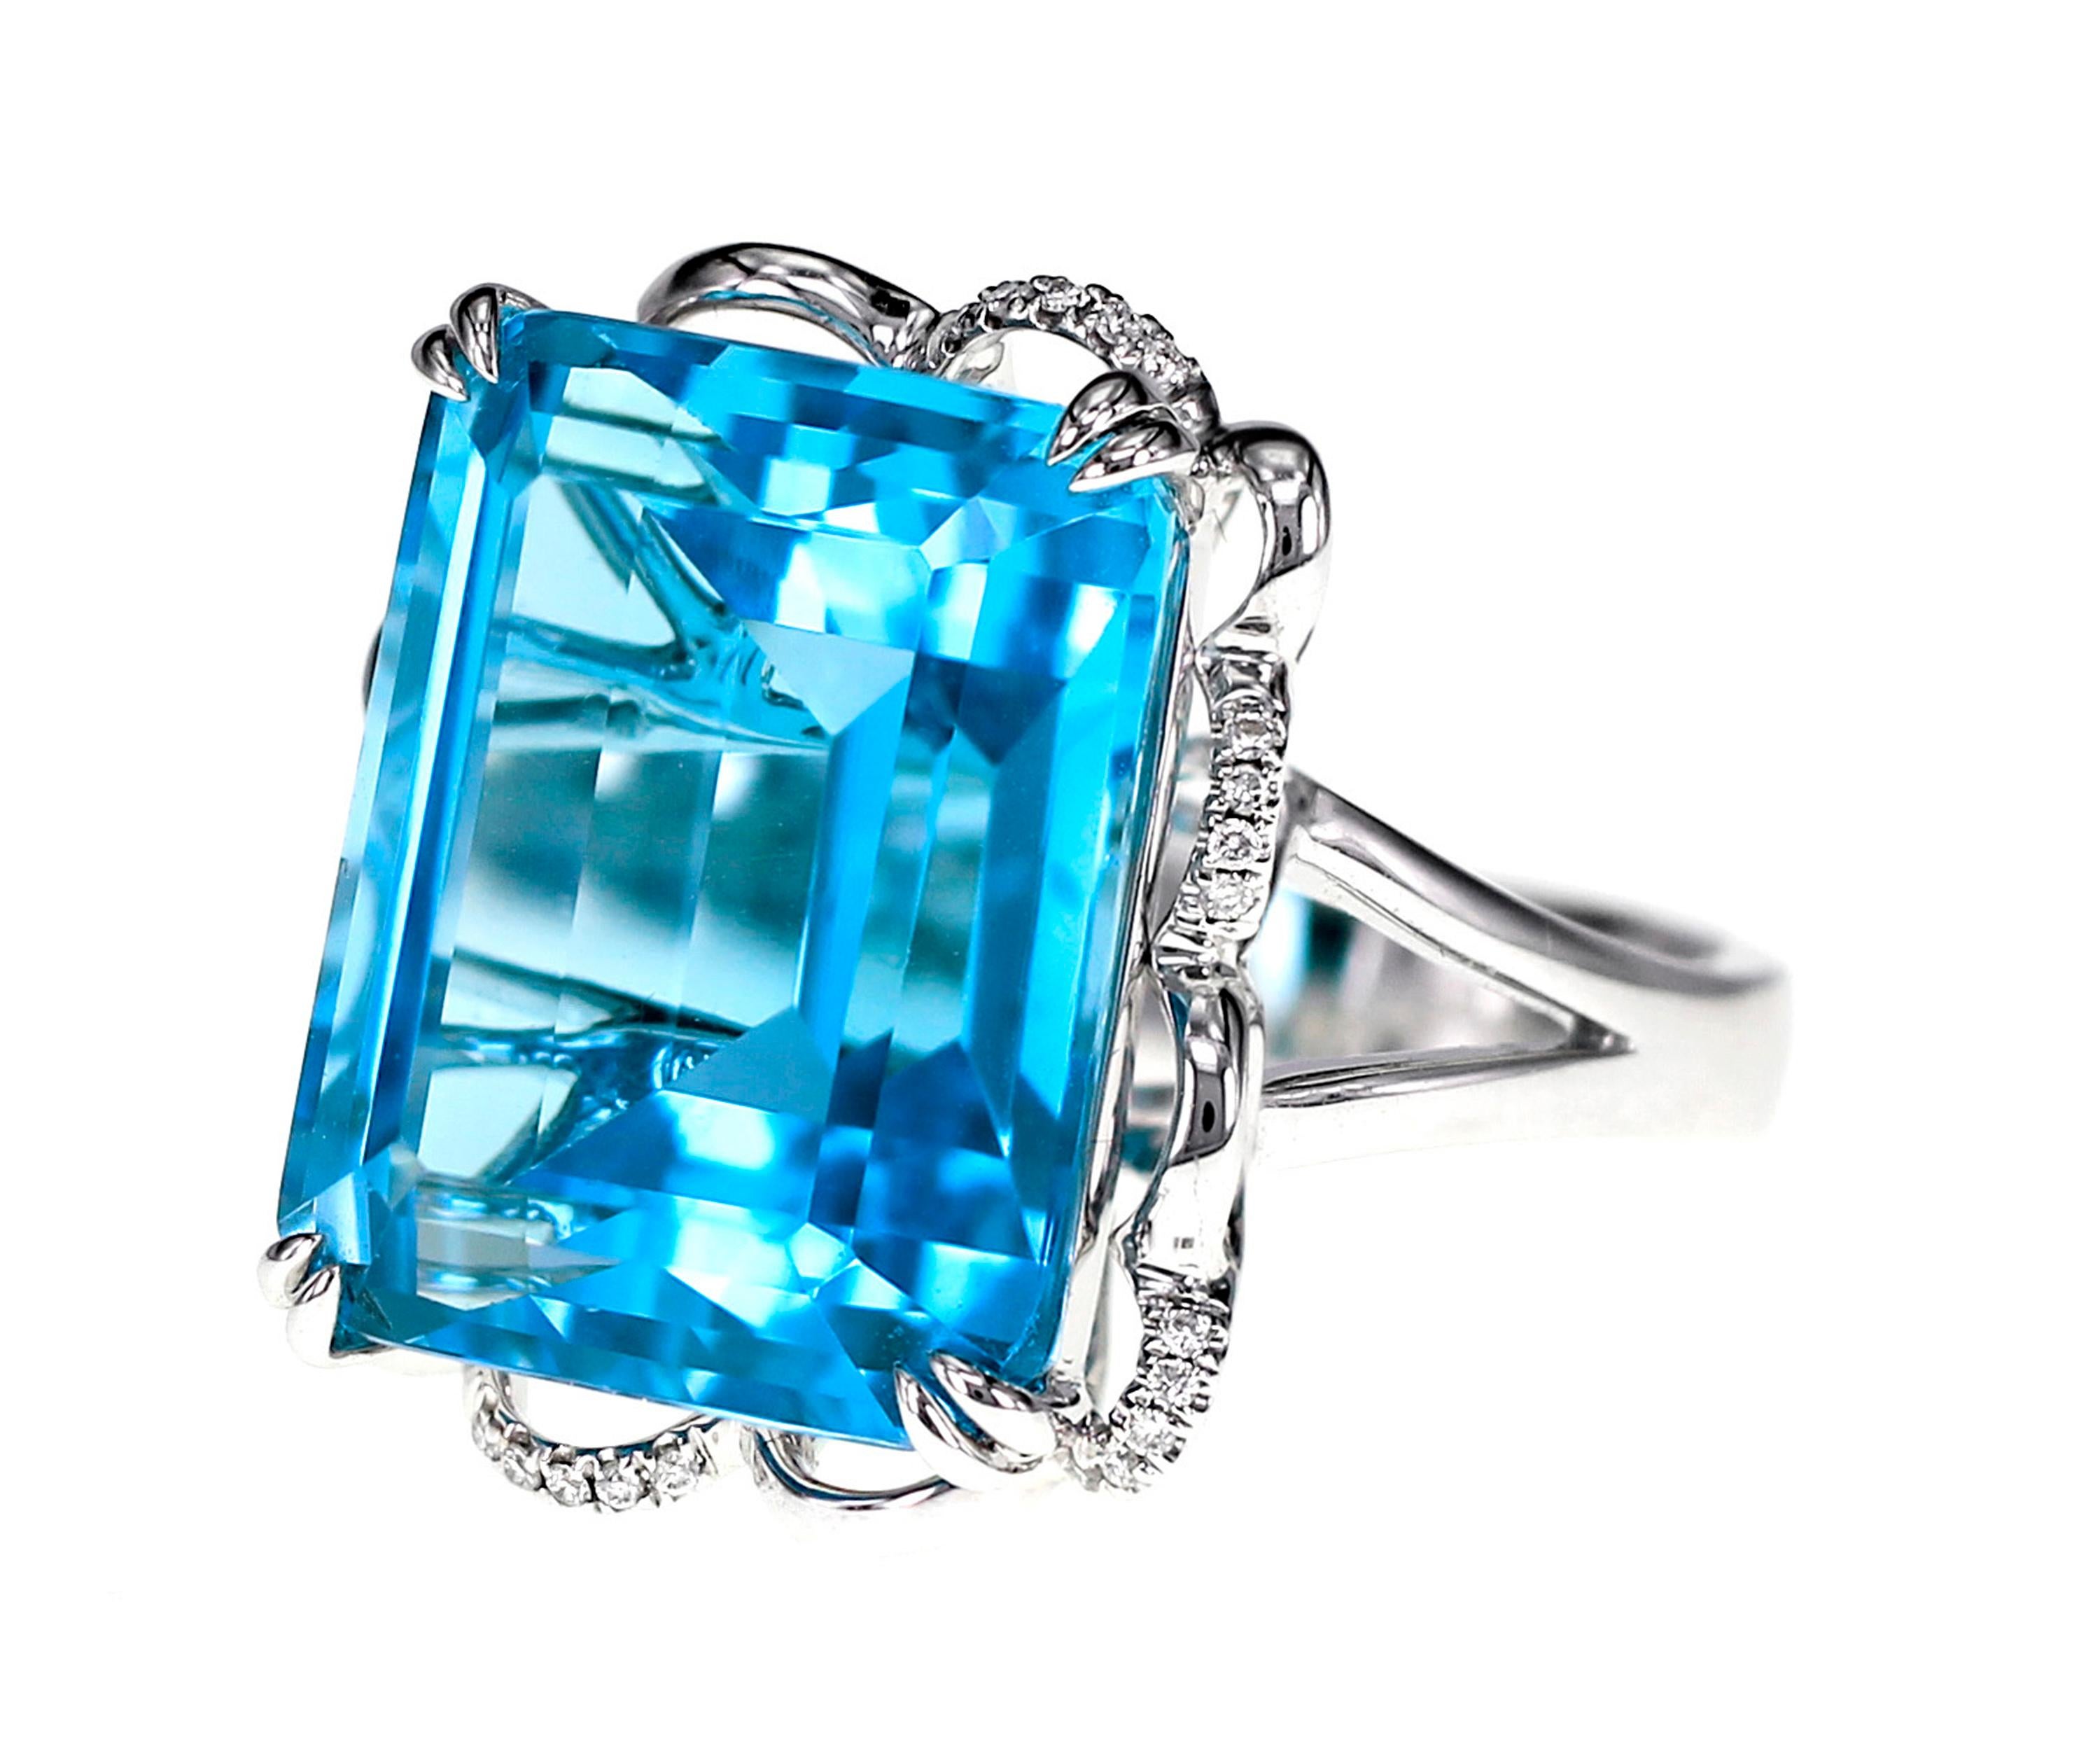 A lovely London Blue 21.64 carat of Blue Topaz is set with FG color Vs clarity white brilliant round diamond. The ring is made in white gold and 18 Karat. A total of 4.33 grams of gold has been used to make this classic ring.
Ring size : US 6